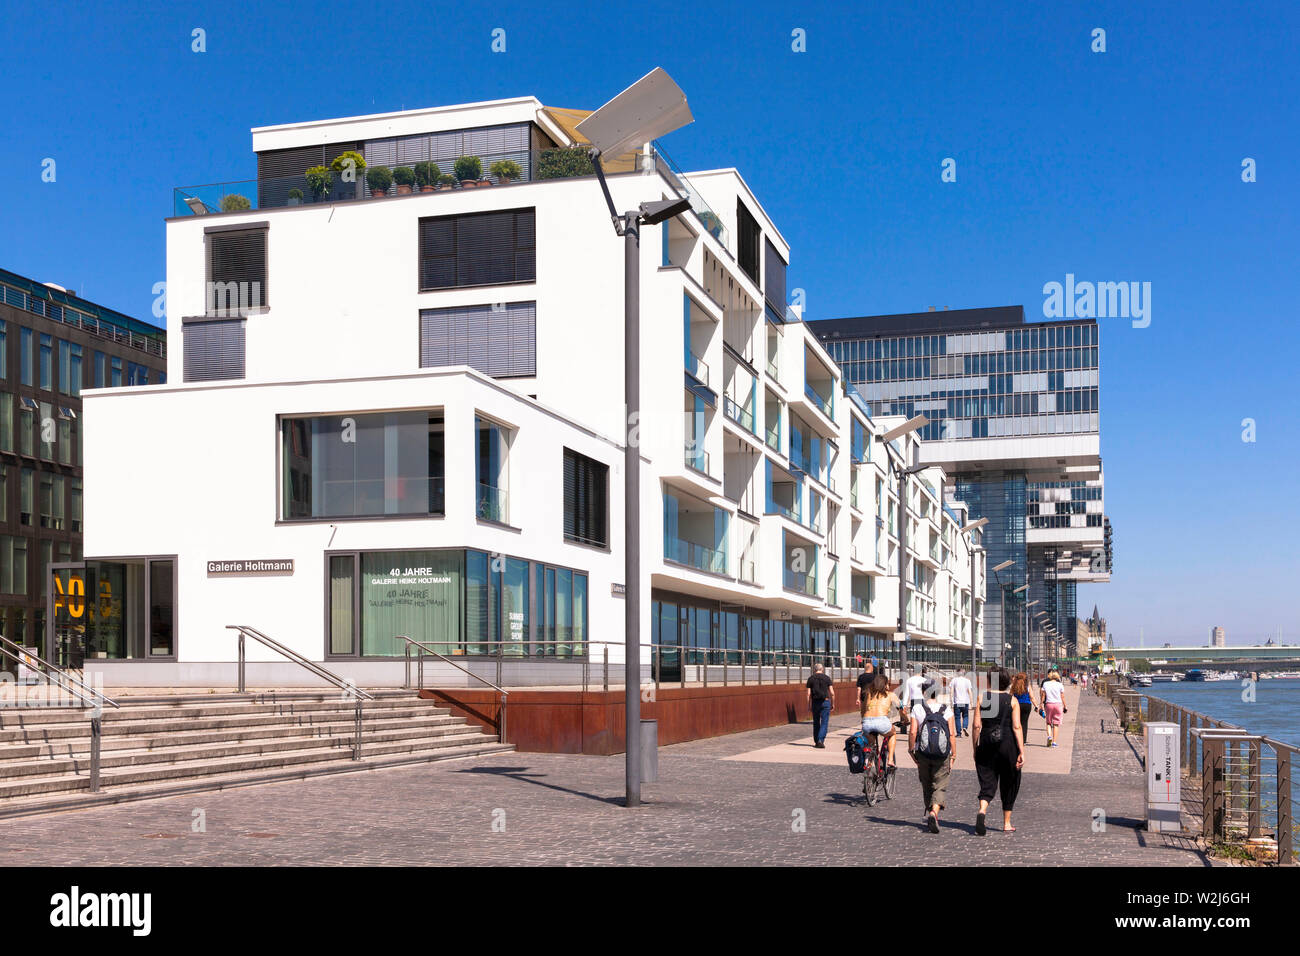 the residential building Wohnwerft by the architects Oxen und Roemer at the Rheinauhafen, in the background the Crane Houses, Cologne, Germany.  Europ Stock Photo